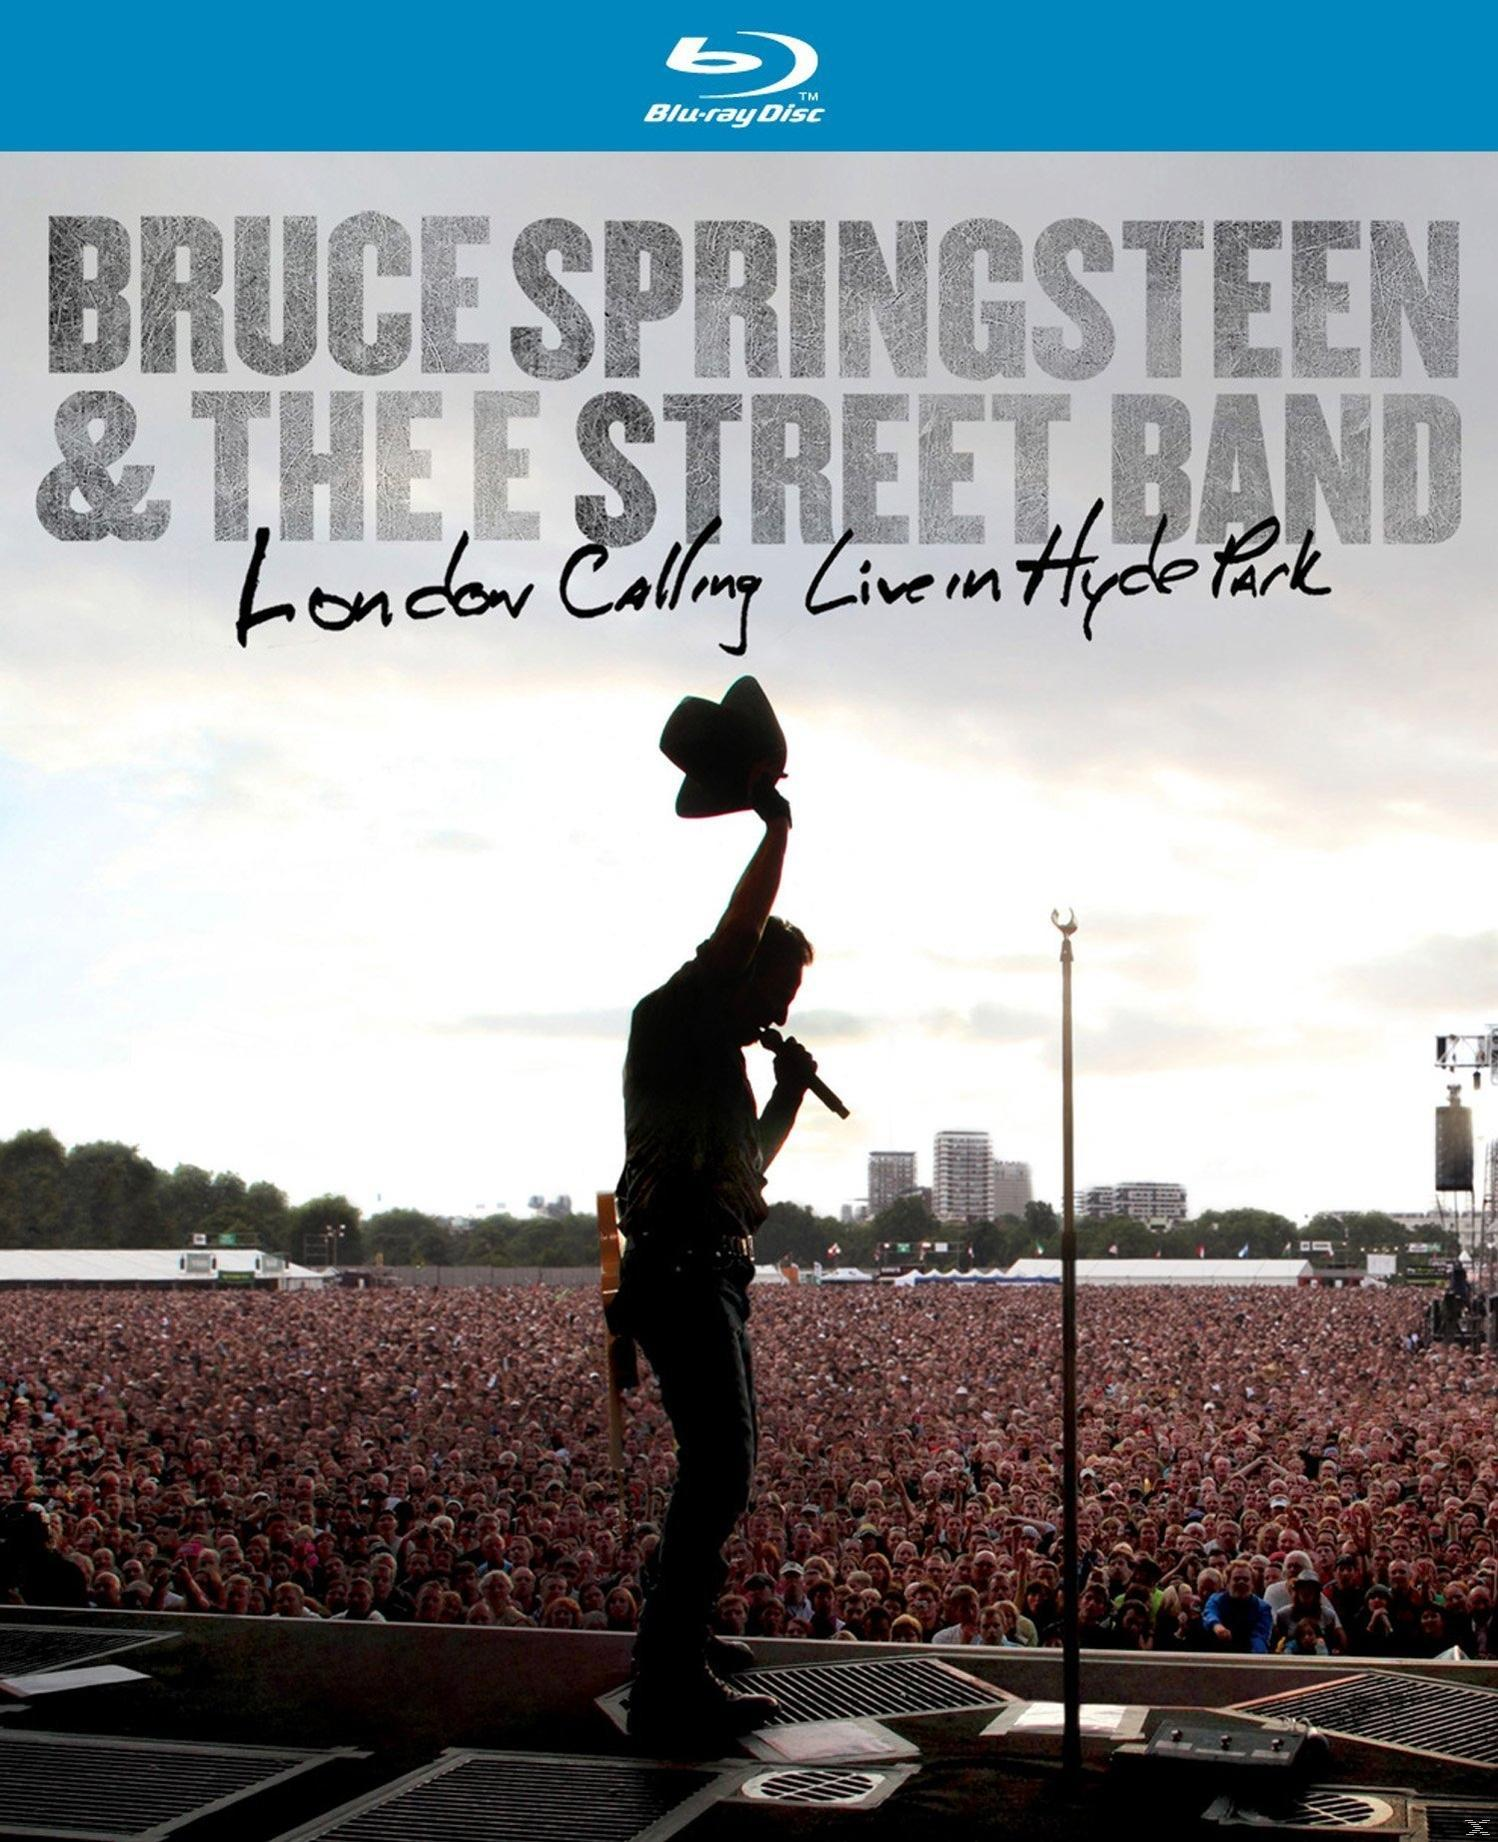 Bruce Springsteen, The - - Park London - - Street In Live E (Blu-ray) Calling Band Band Hyde Street E